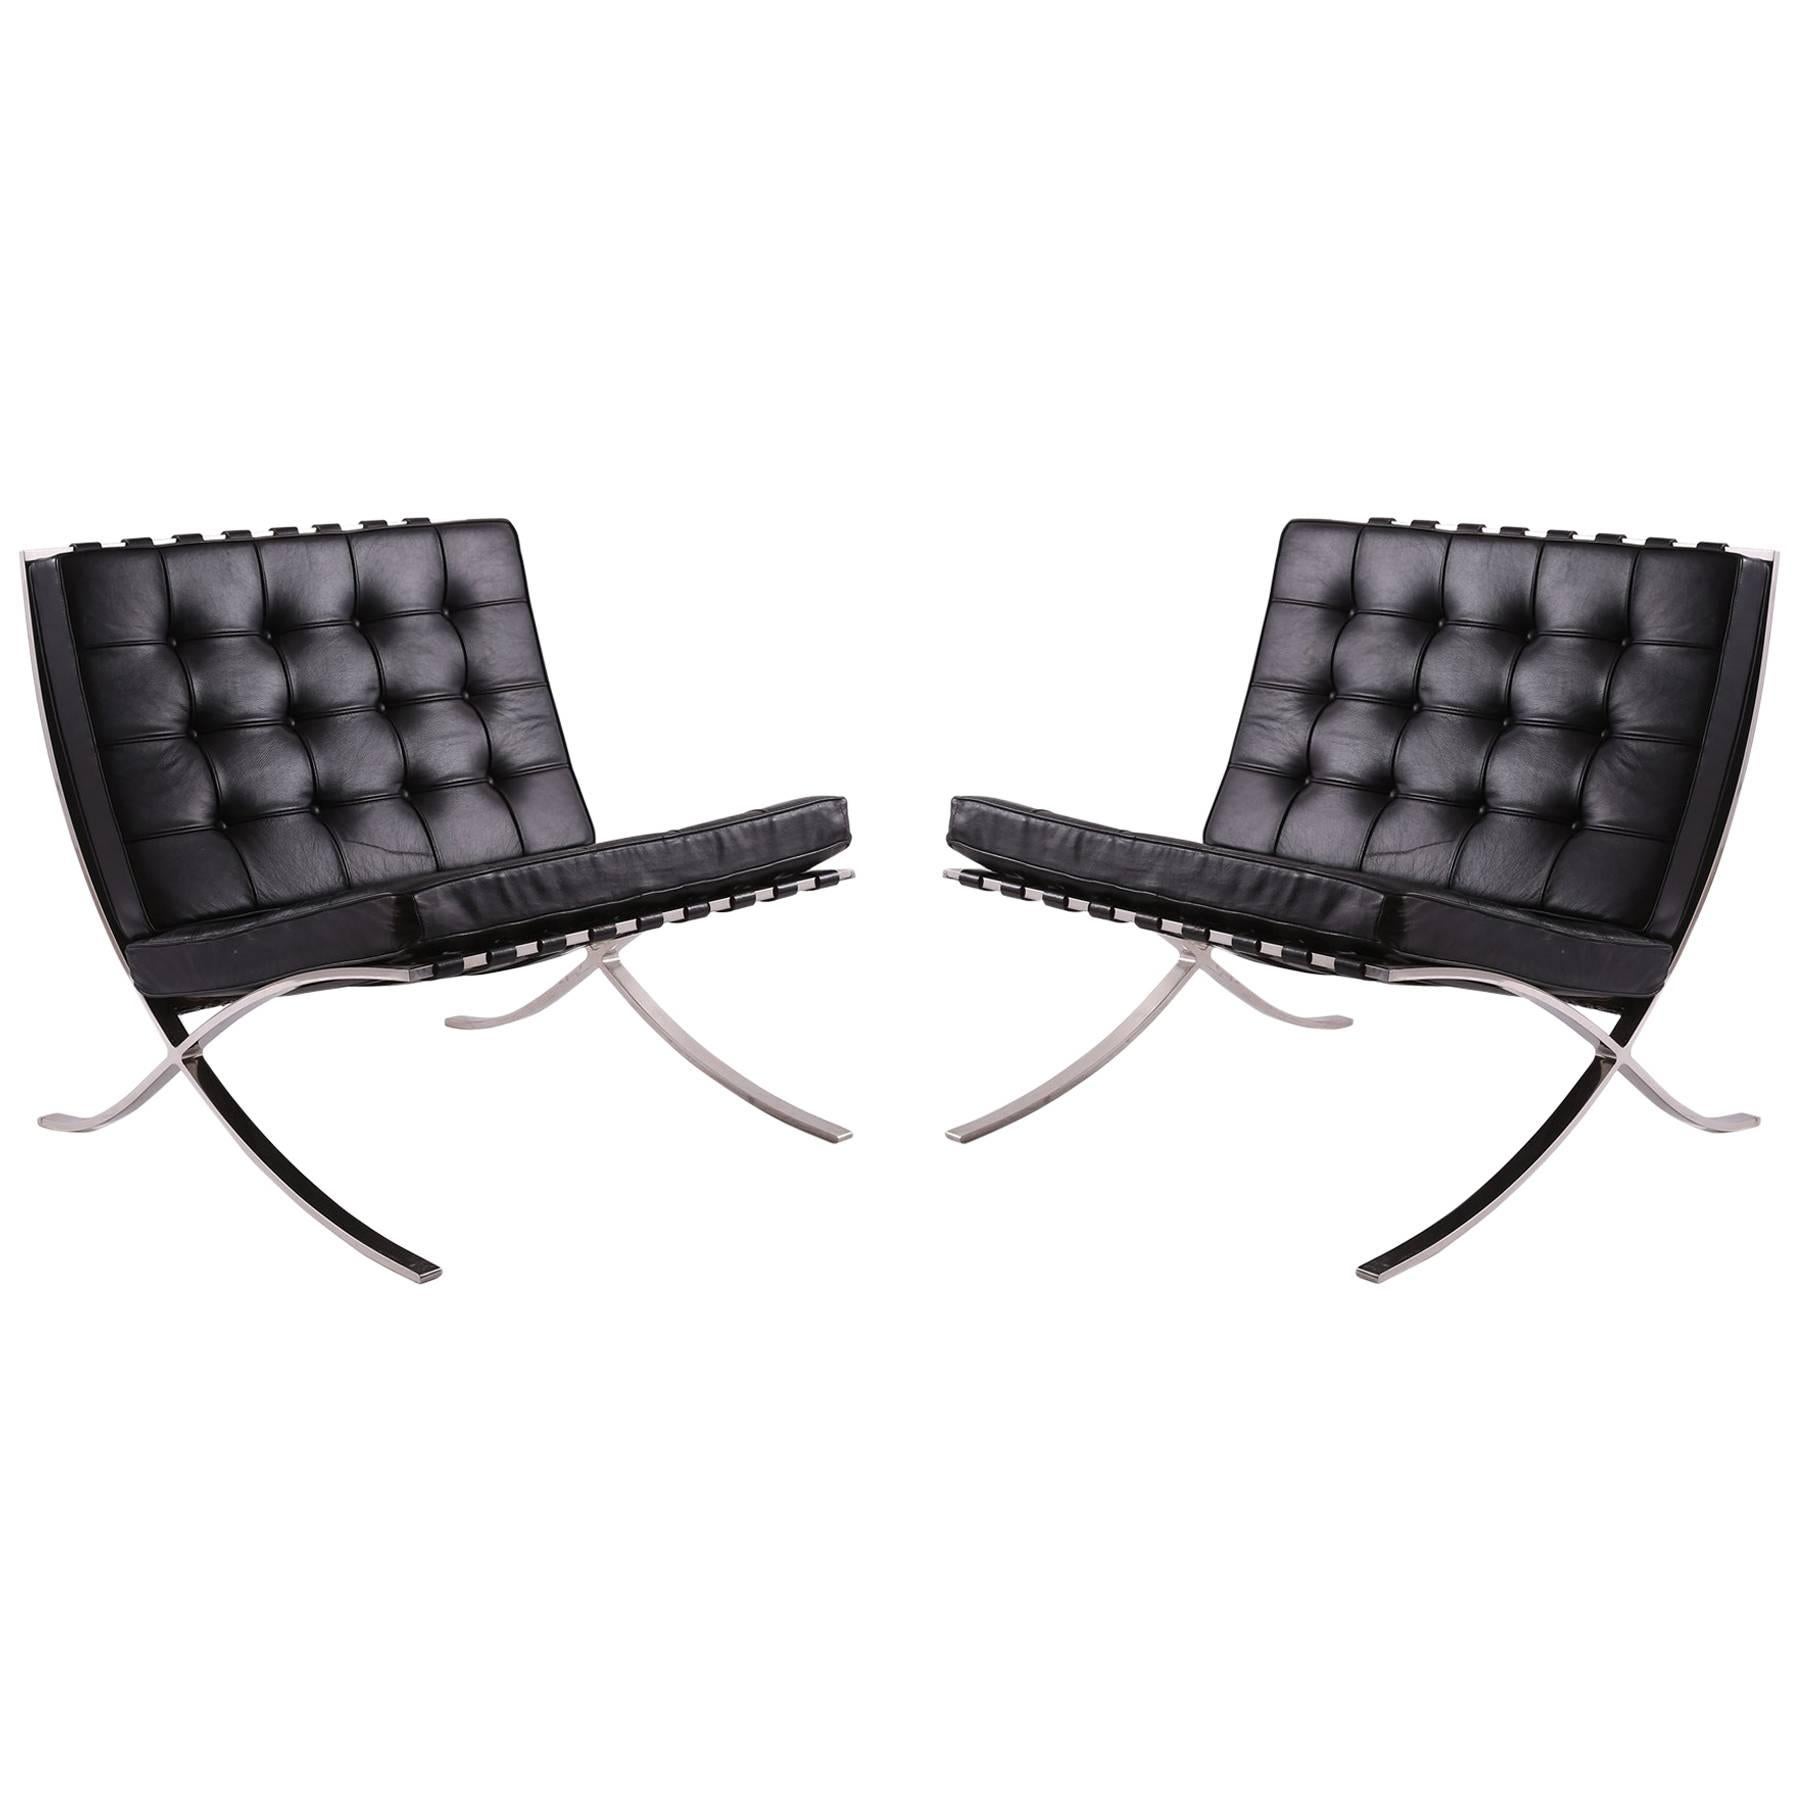 Early Mies van der Rohe for Knoll Barcelona Chairs